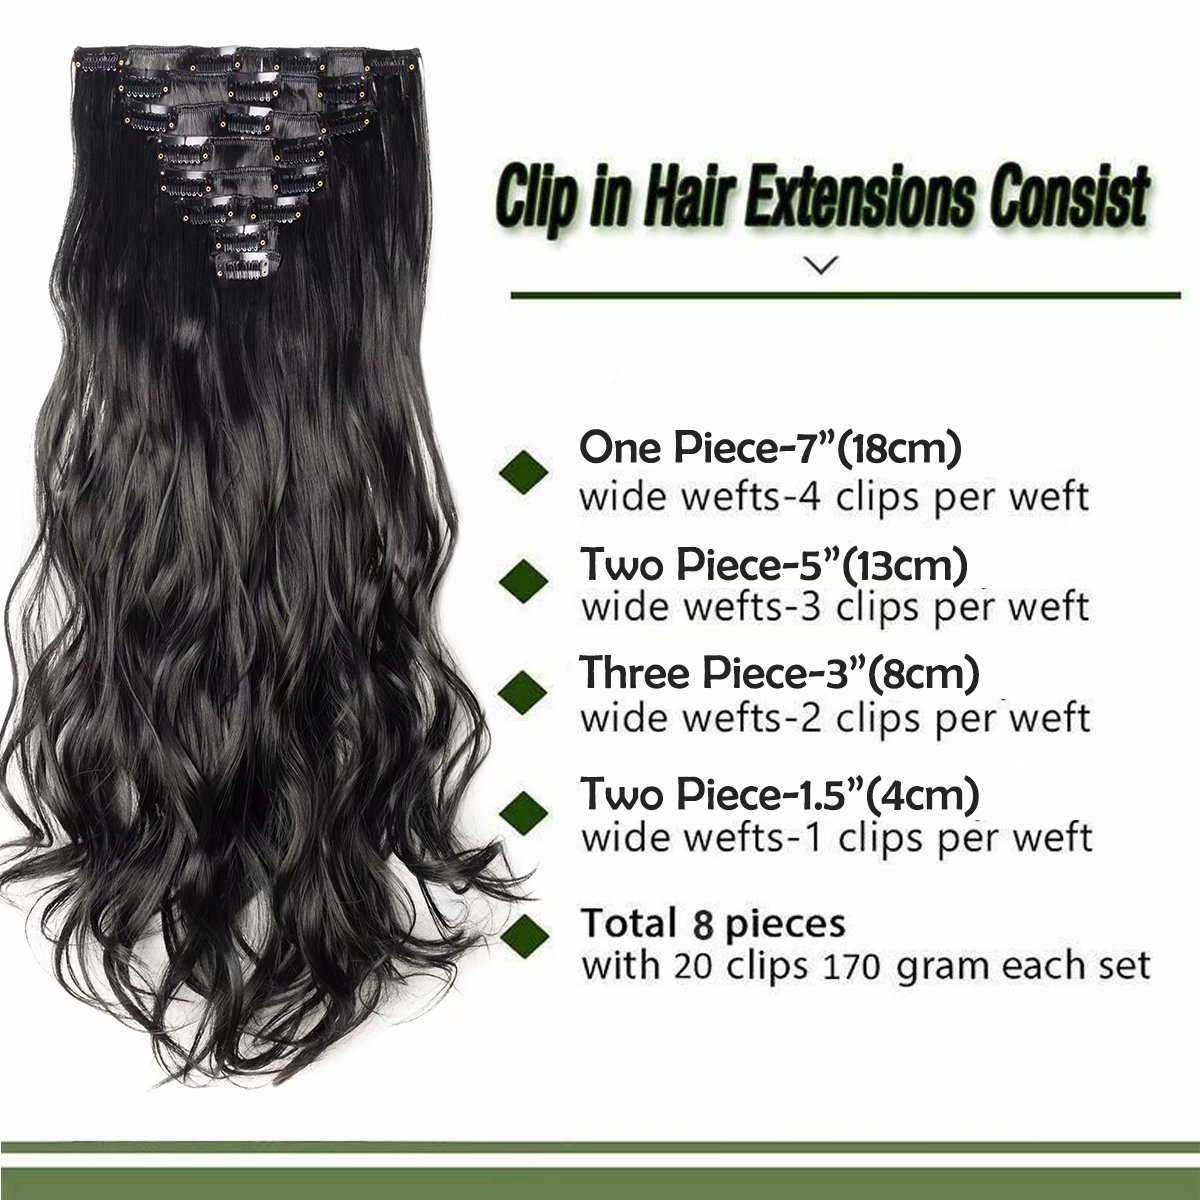 Benehair Clip in Hair Extensions Full Head Long Thick 8 Pieces Hair 18 Clips Curly Wavy Straight Hairpieces 100% Real Natural as Human Best Hair Set 24'' Curly Dark Black - image 4 of 11